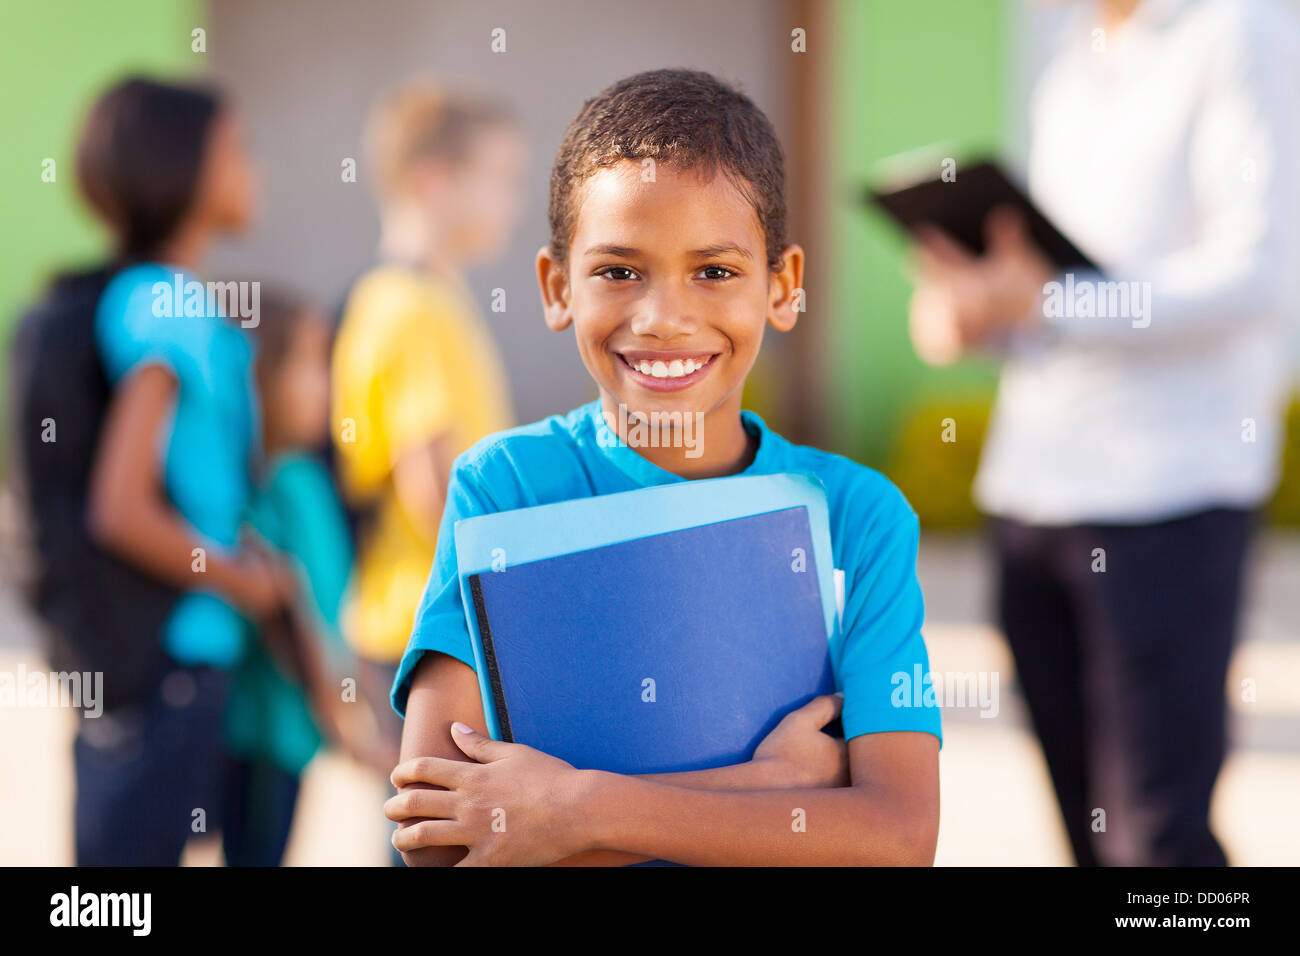 cheerful african male elementary school student holding text books Stock Photo